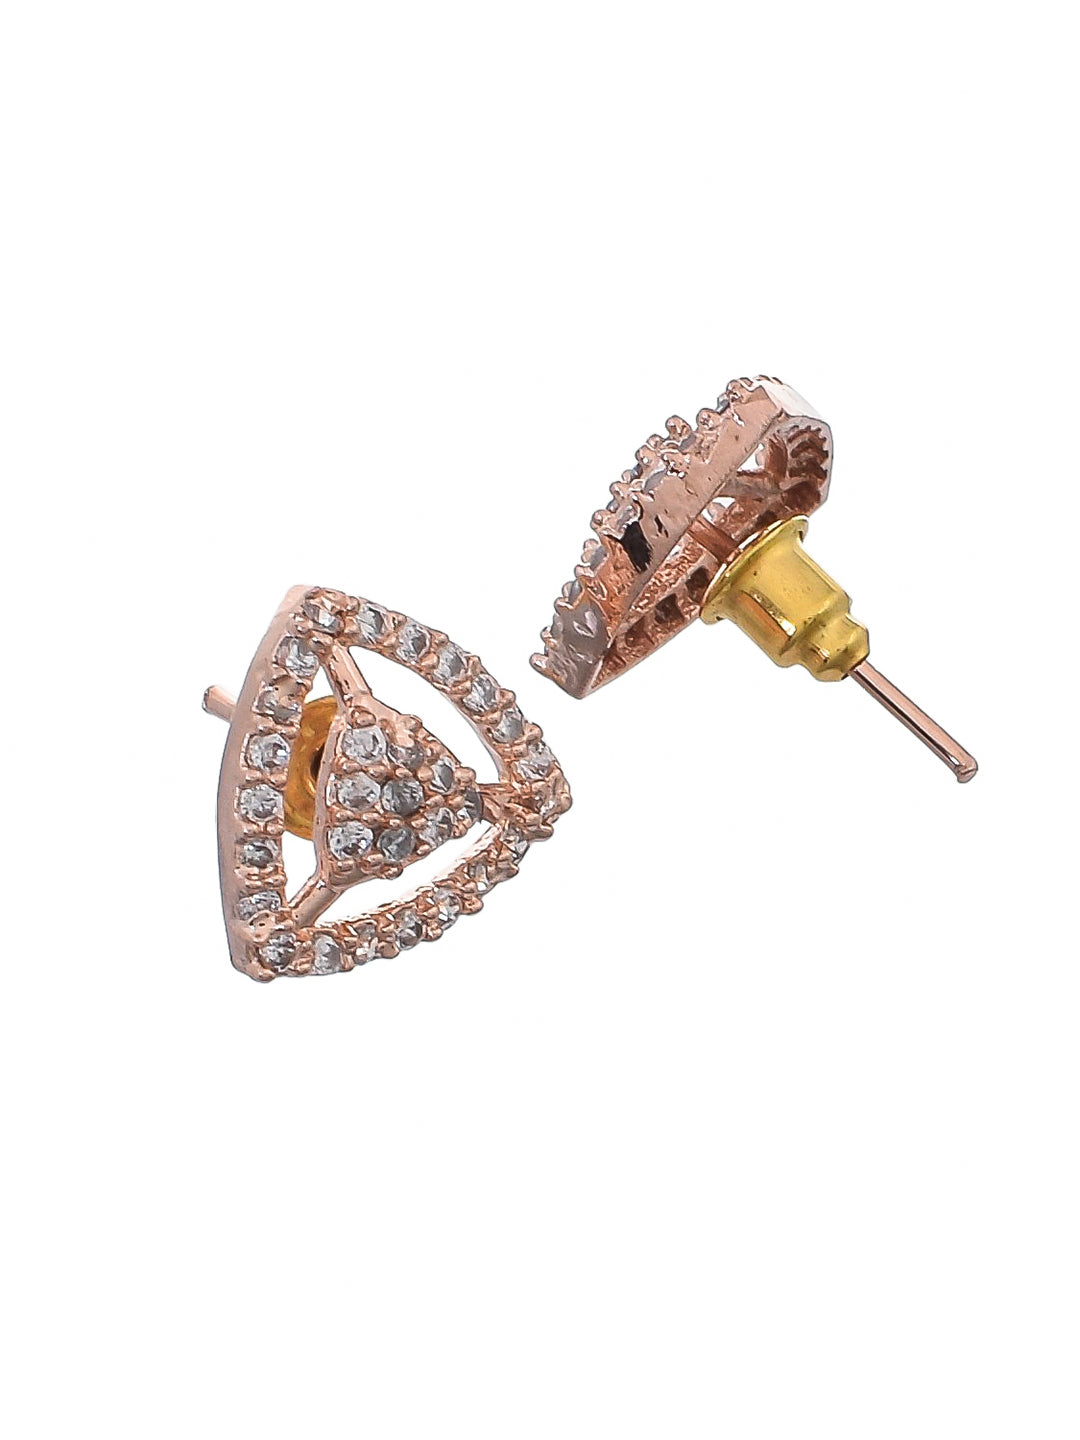 Buy quality Traditional Diamond Stud Earring in 18K Rose Gold in Pune